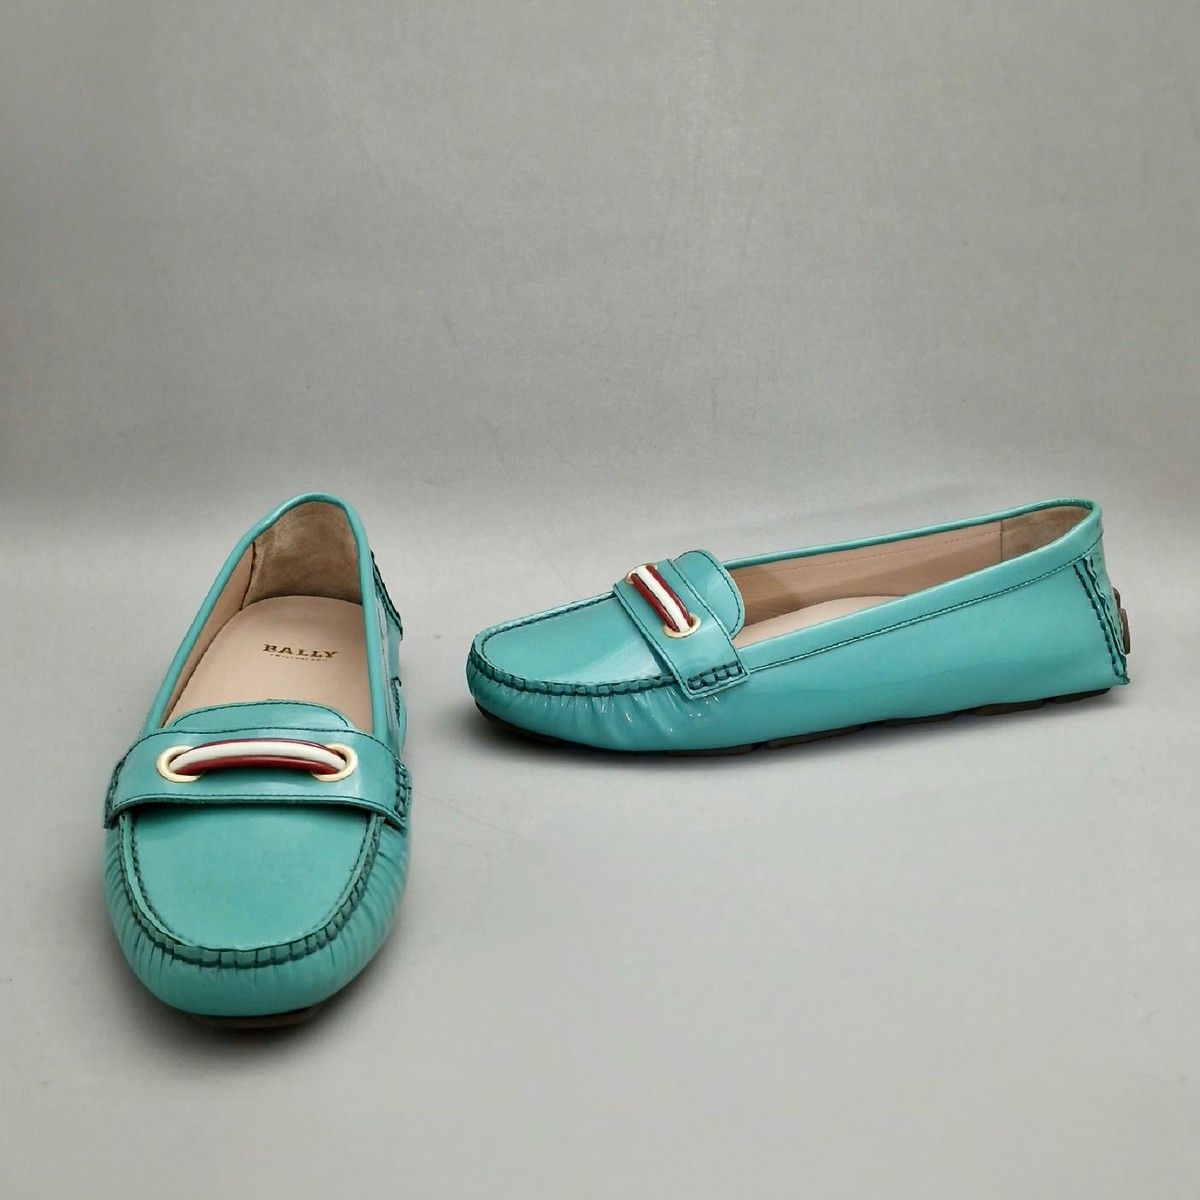 Null BALLY - PAIR OF SOFT MOCASSINS Size 40, in turquoise patent leather, two-to&hellip;